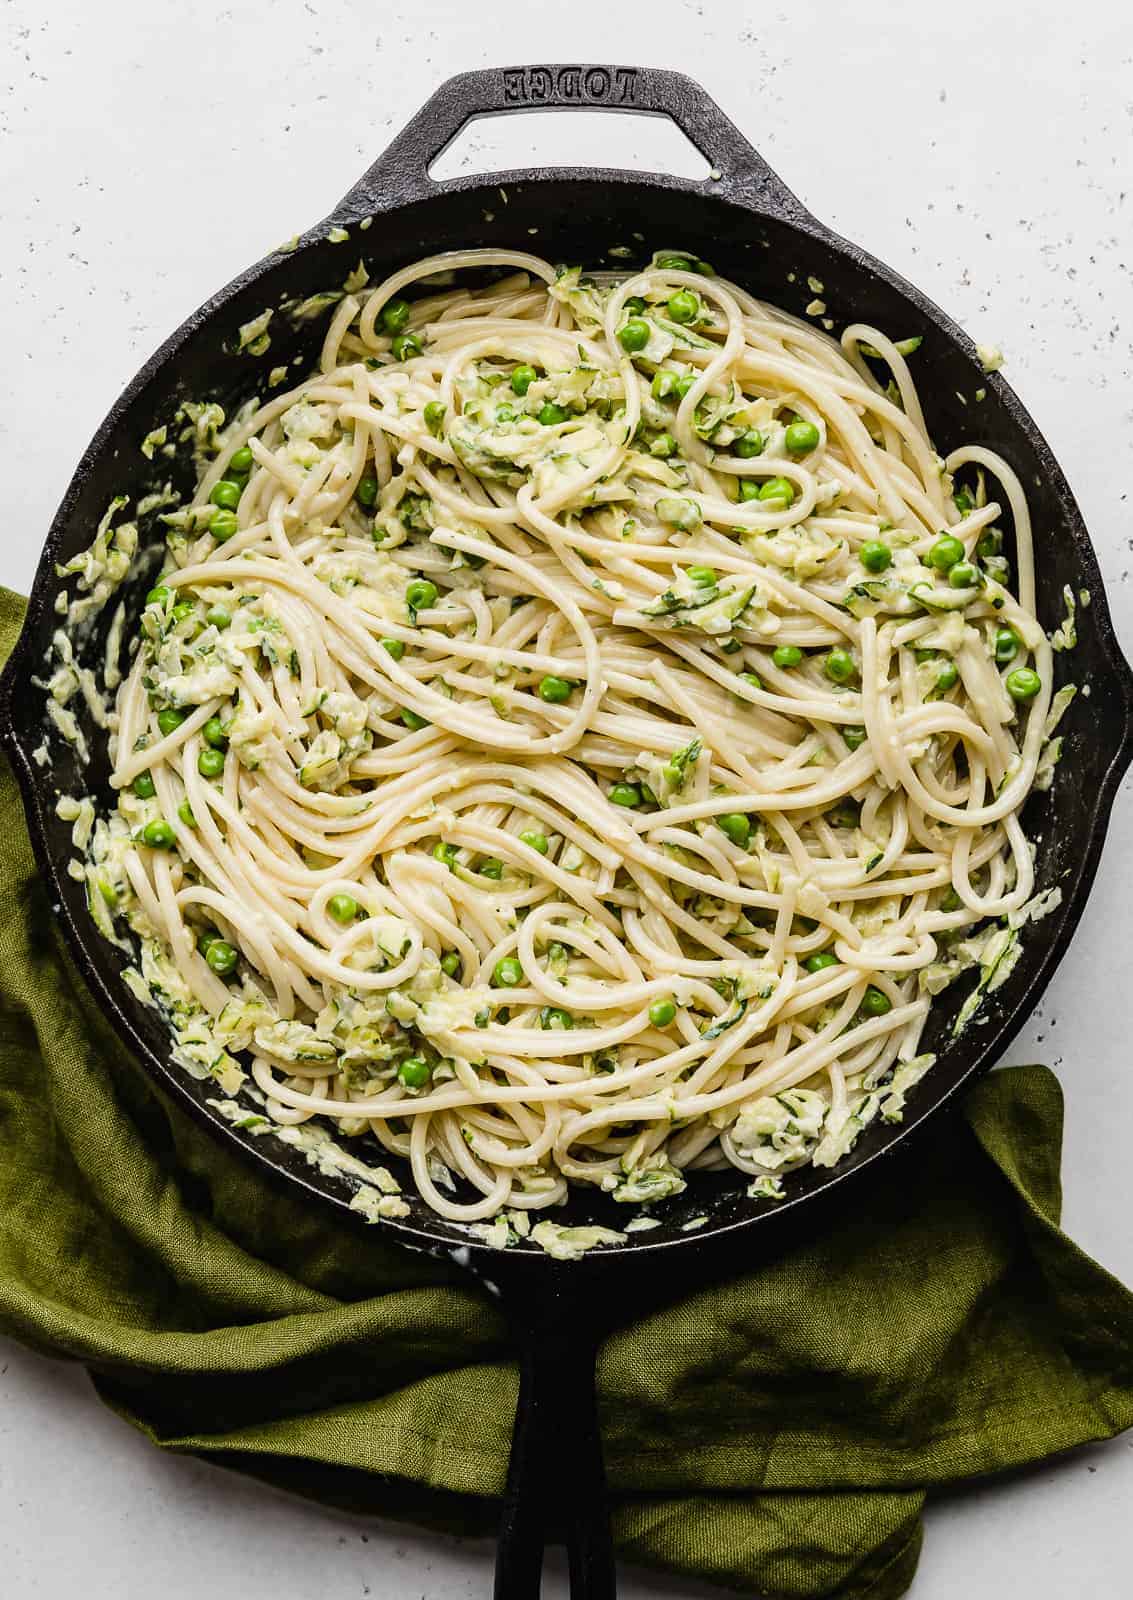 Pasta with Zucchini Sauce in a black skillet against a white background.